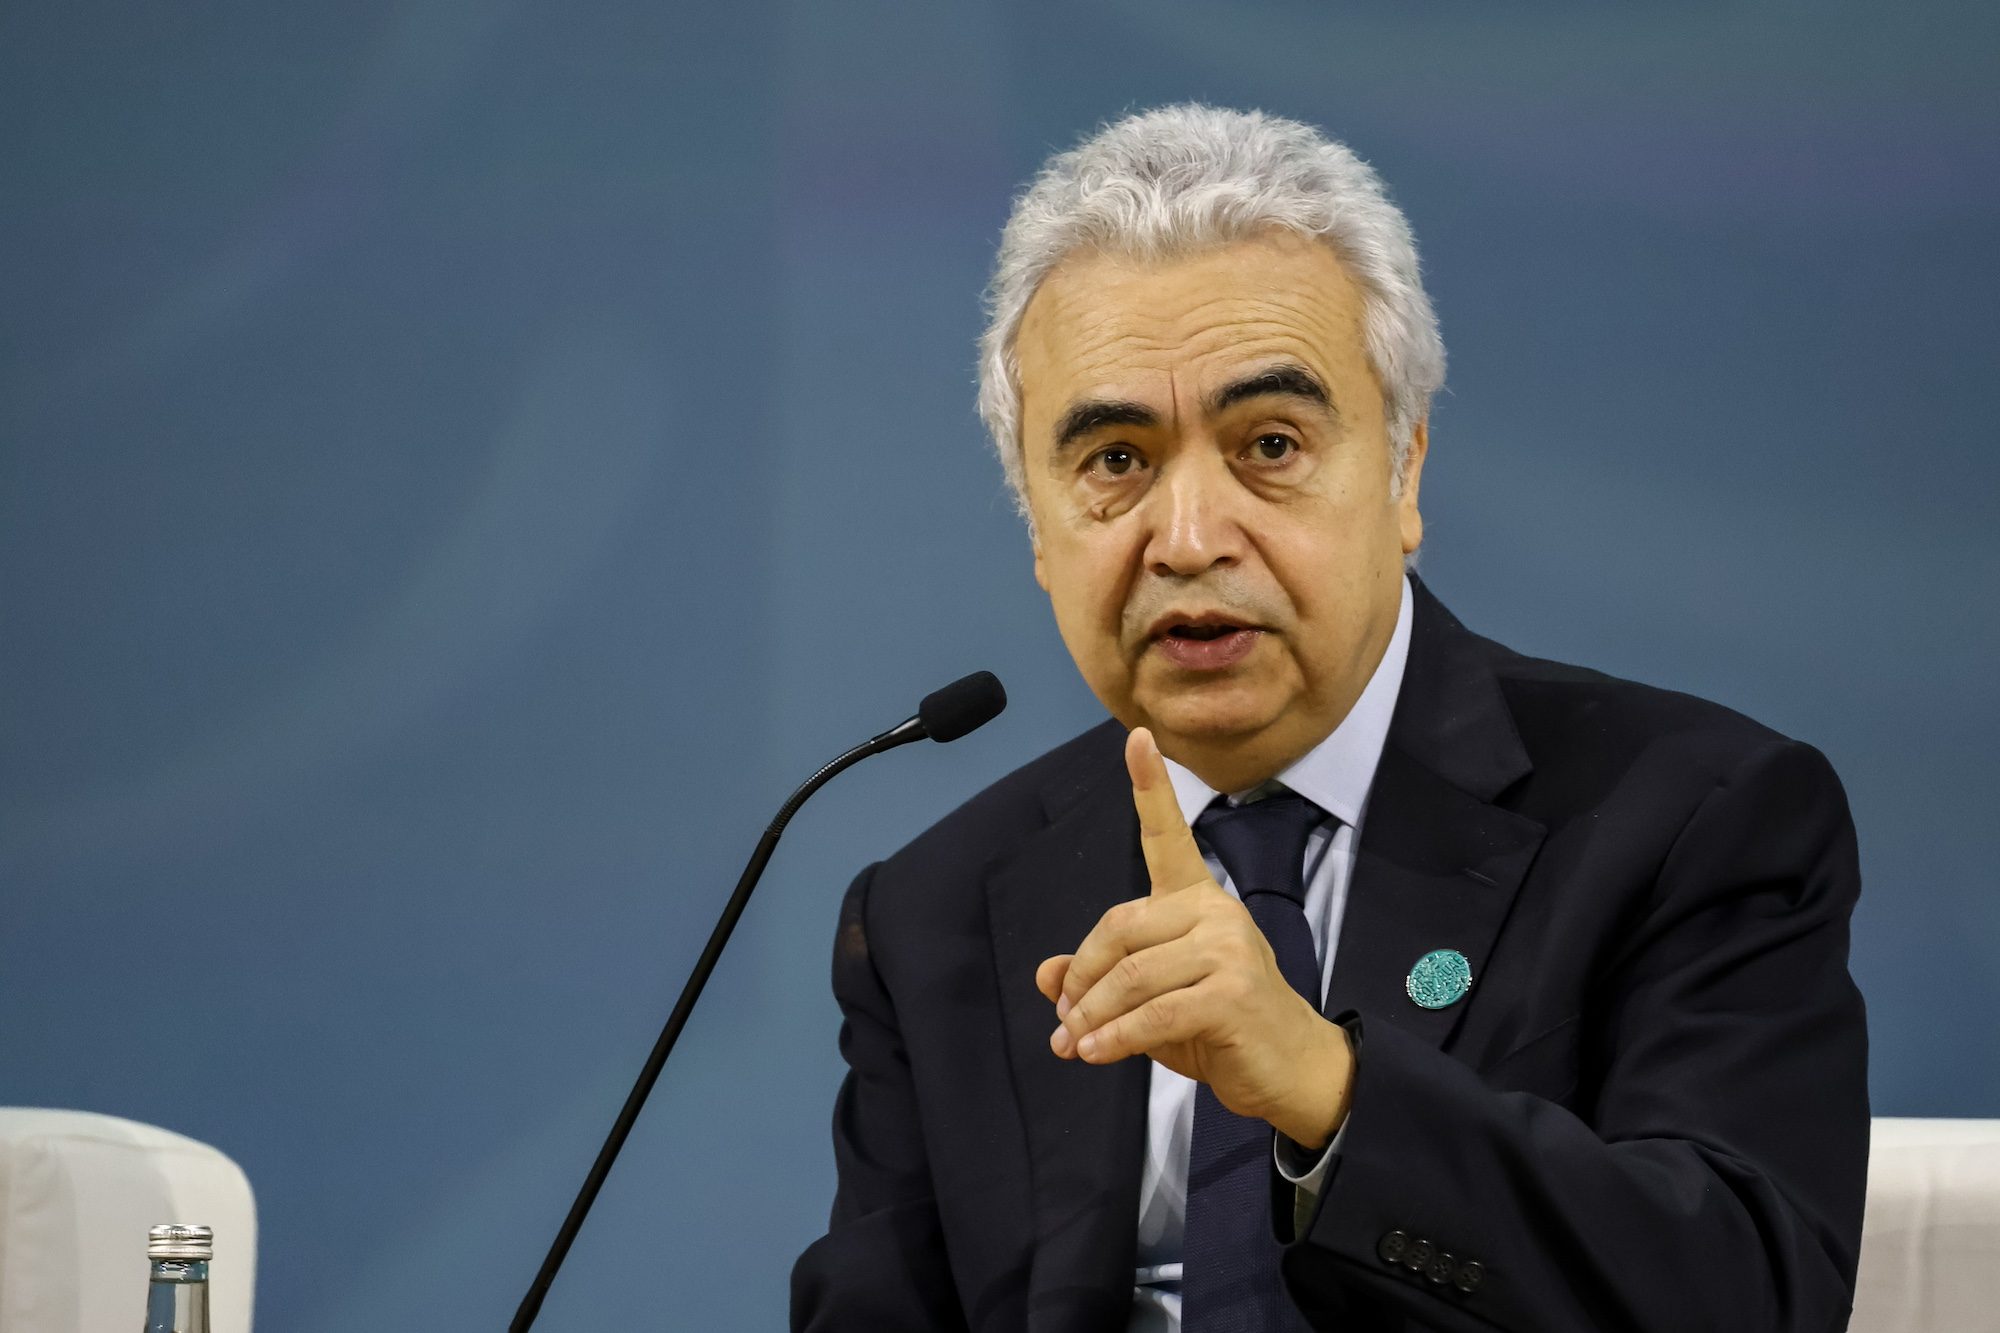 The increase in clean energy investment is 'underpinned by strong economics' according to IEA executive director Fatih Birol